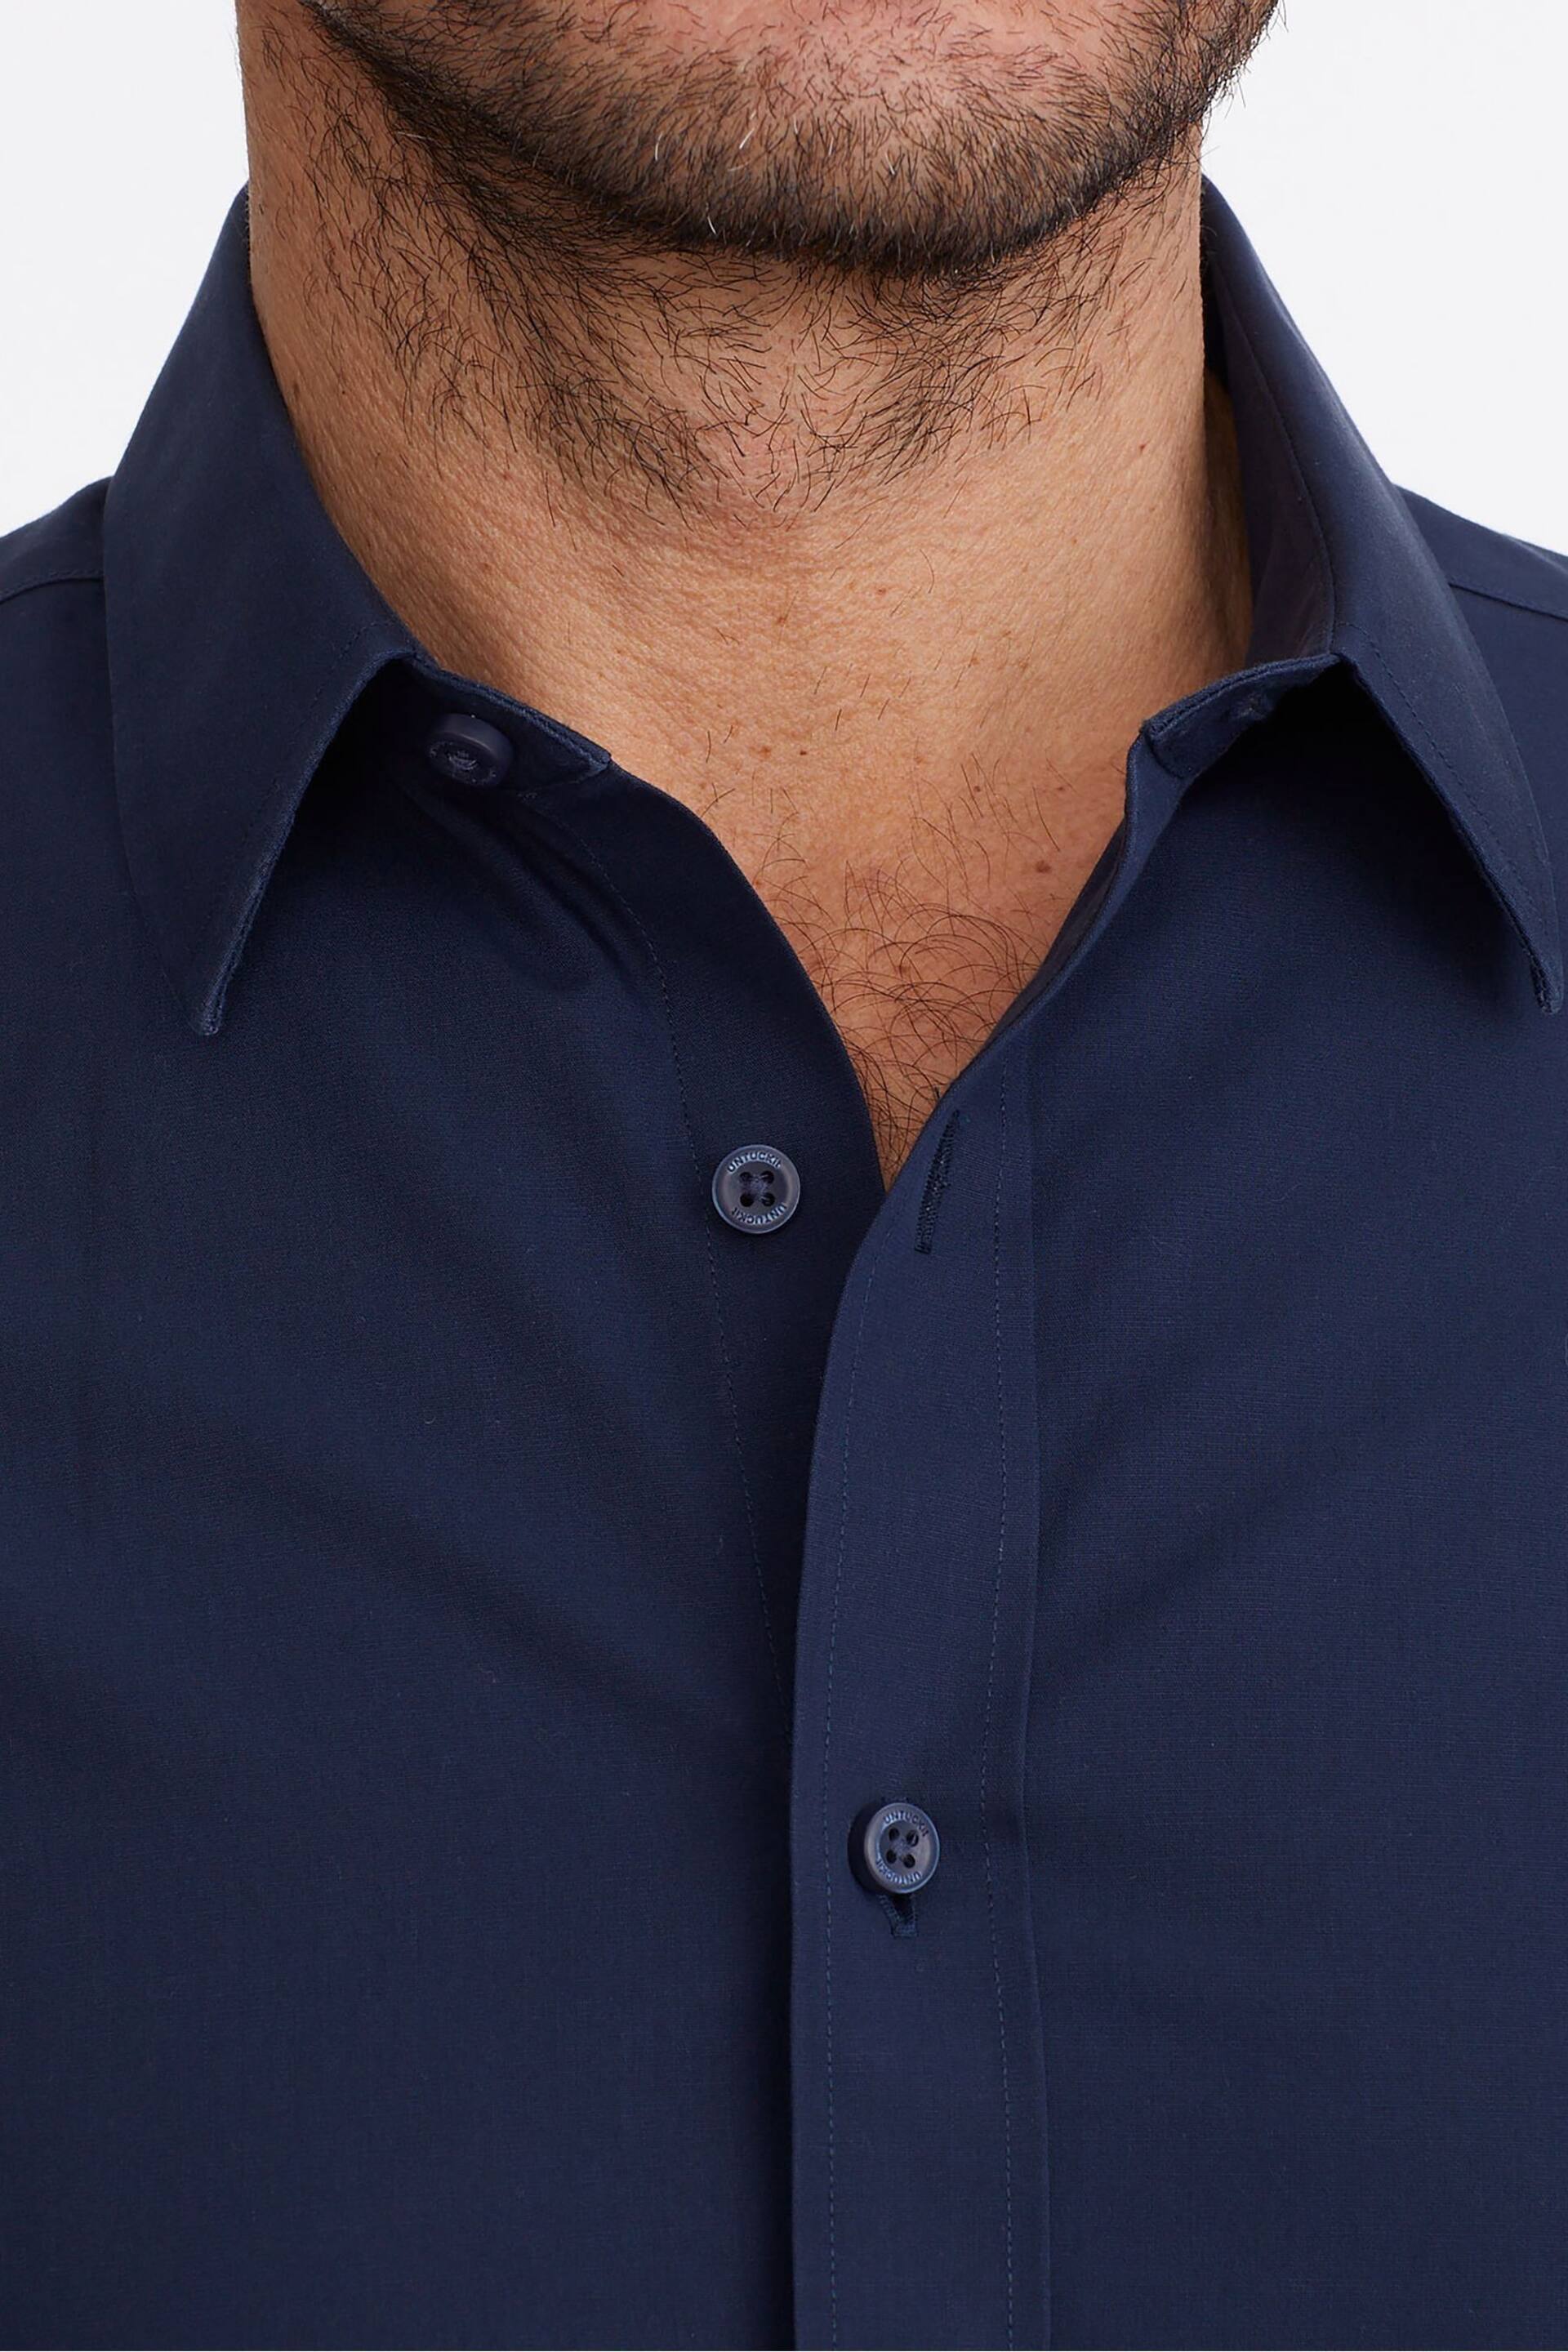 UNTUCKit Navy Blue Wrinkle-Free Relaxed Fit Castello Shirt - Image 3 of 6